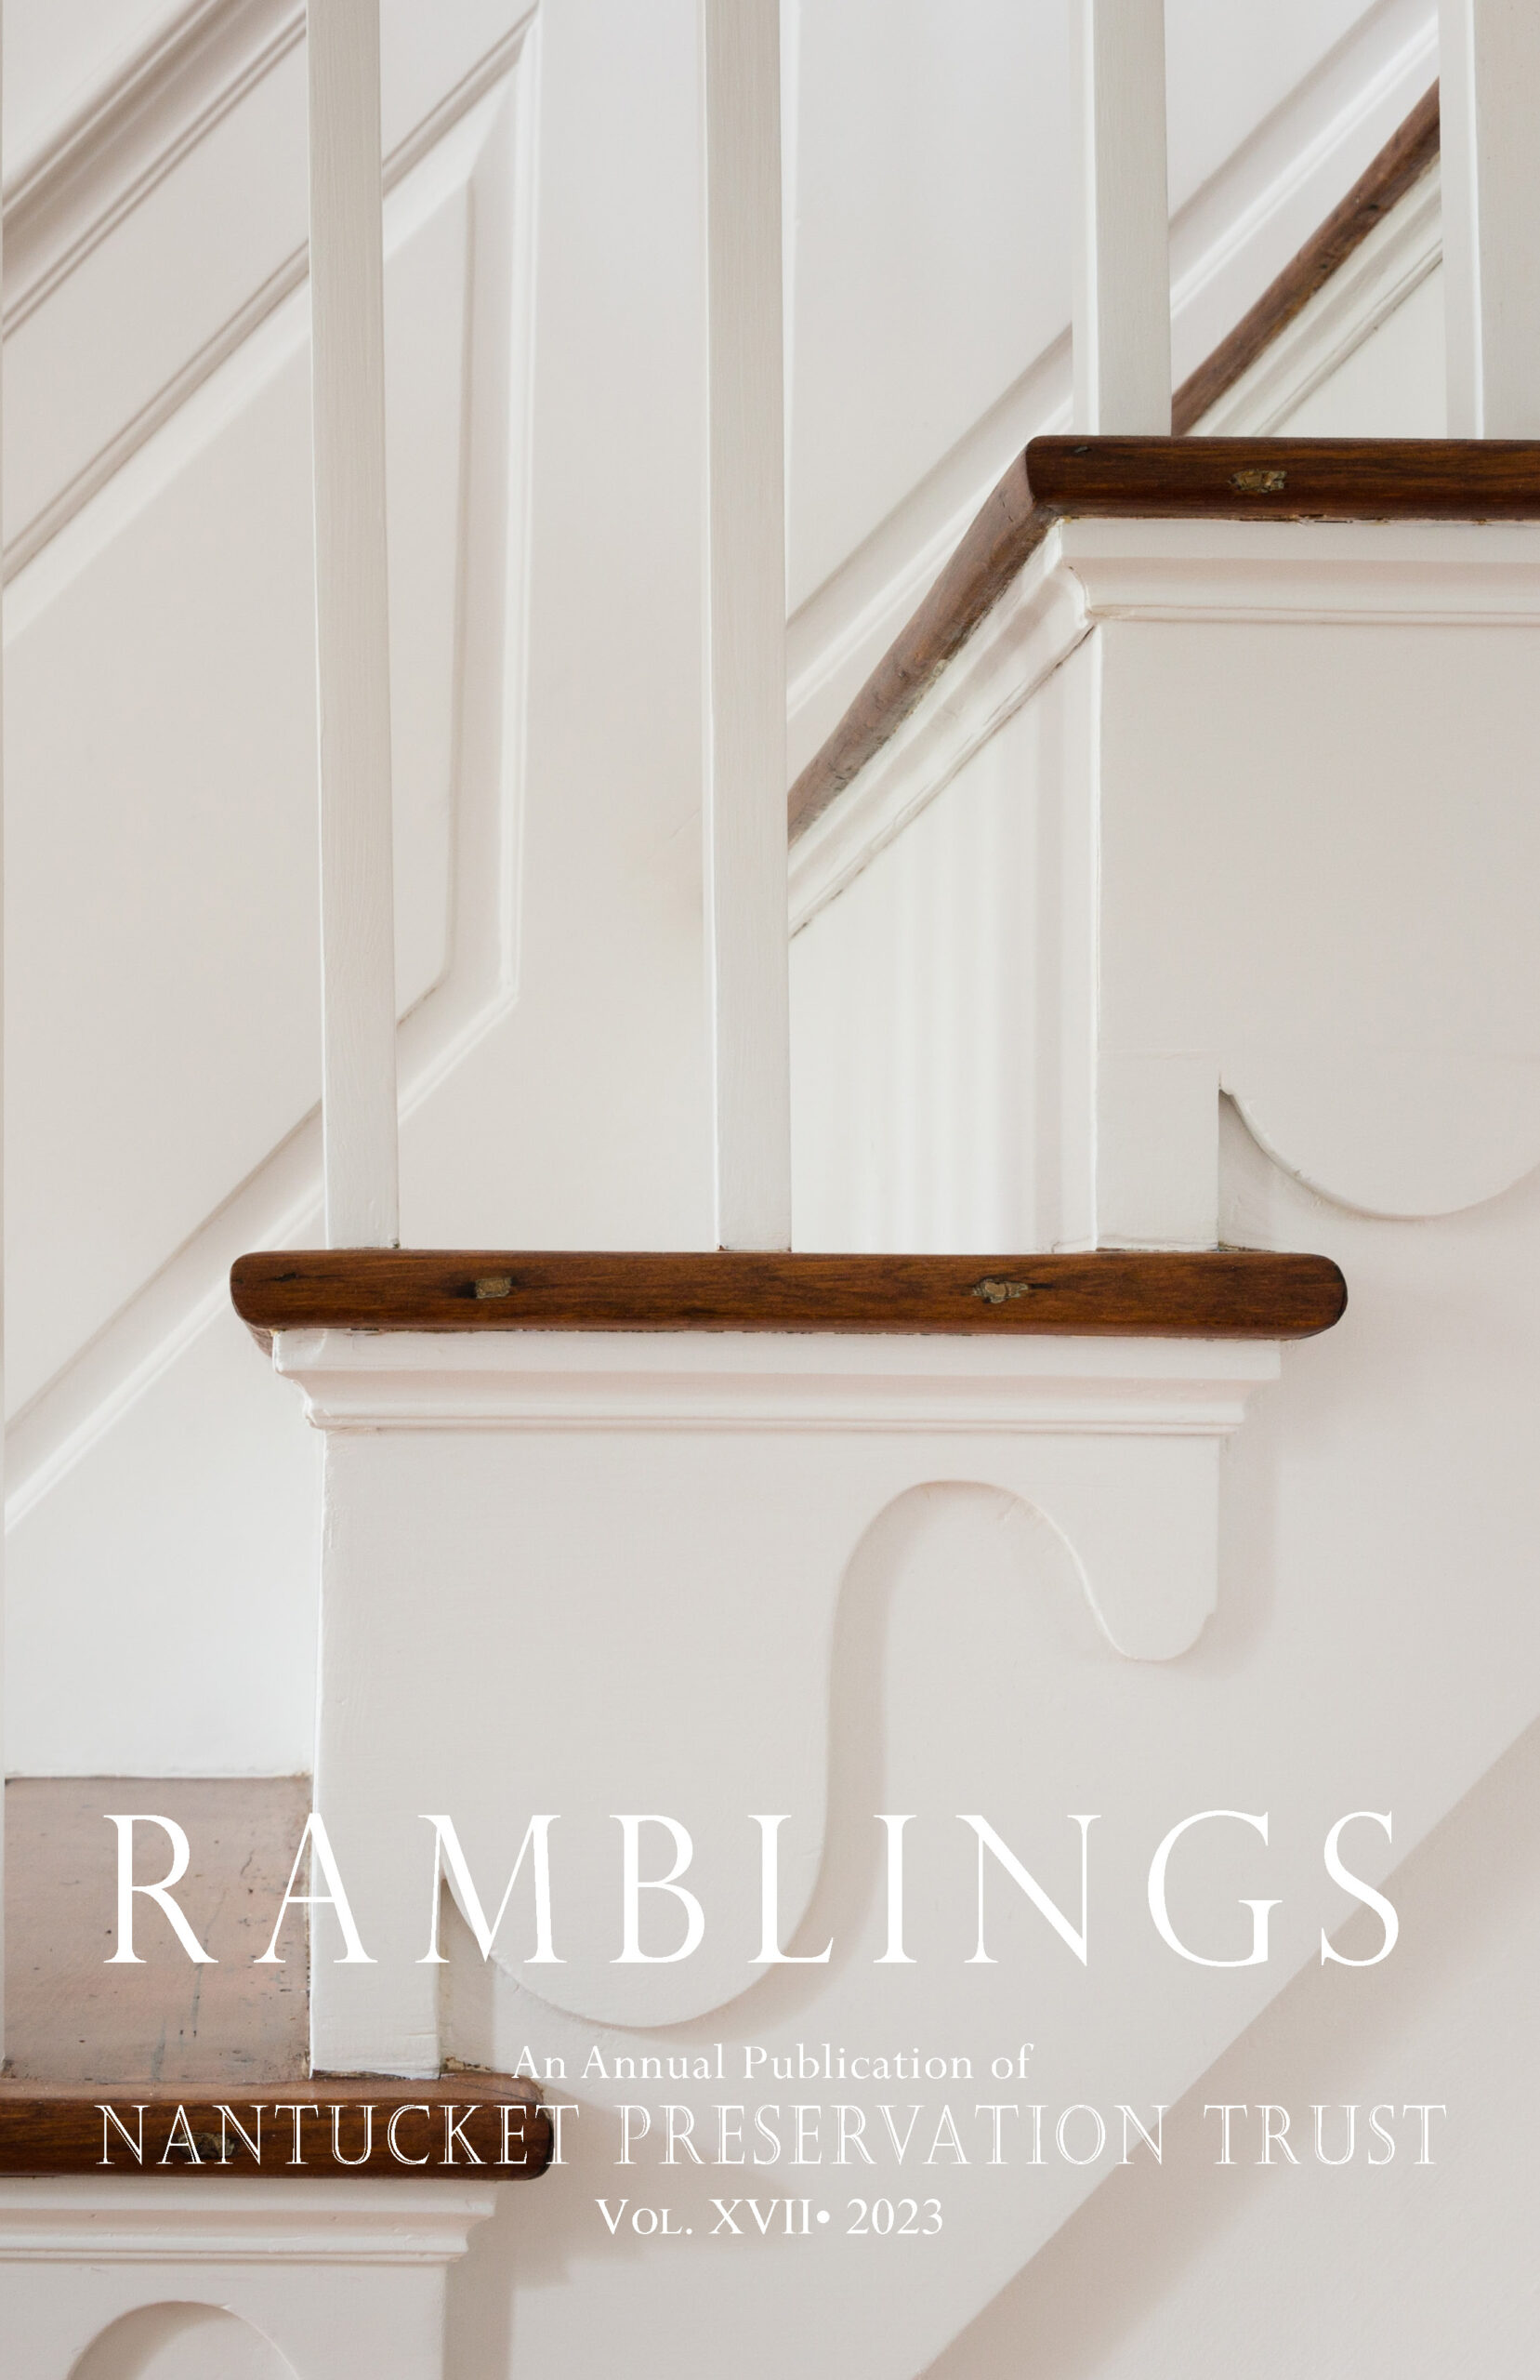 Ramblings now available!